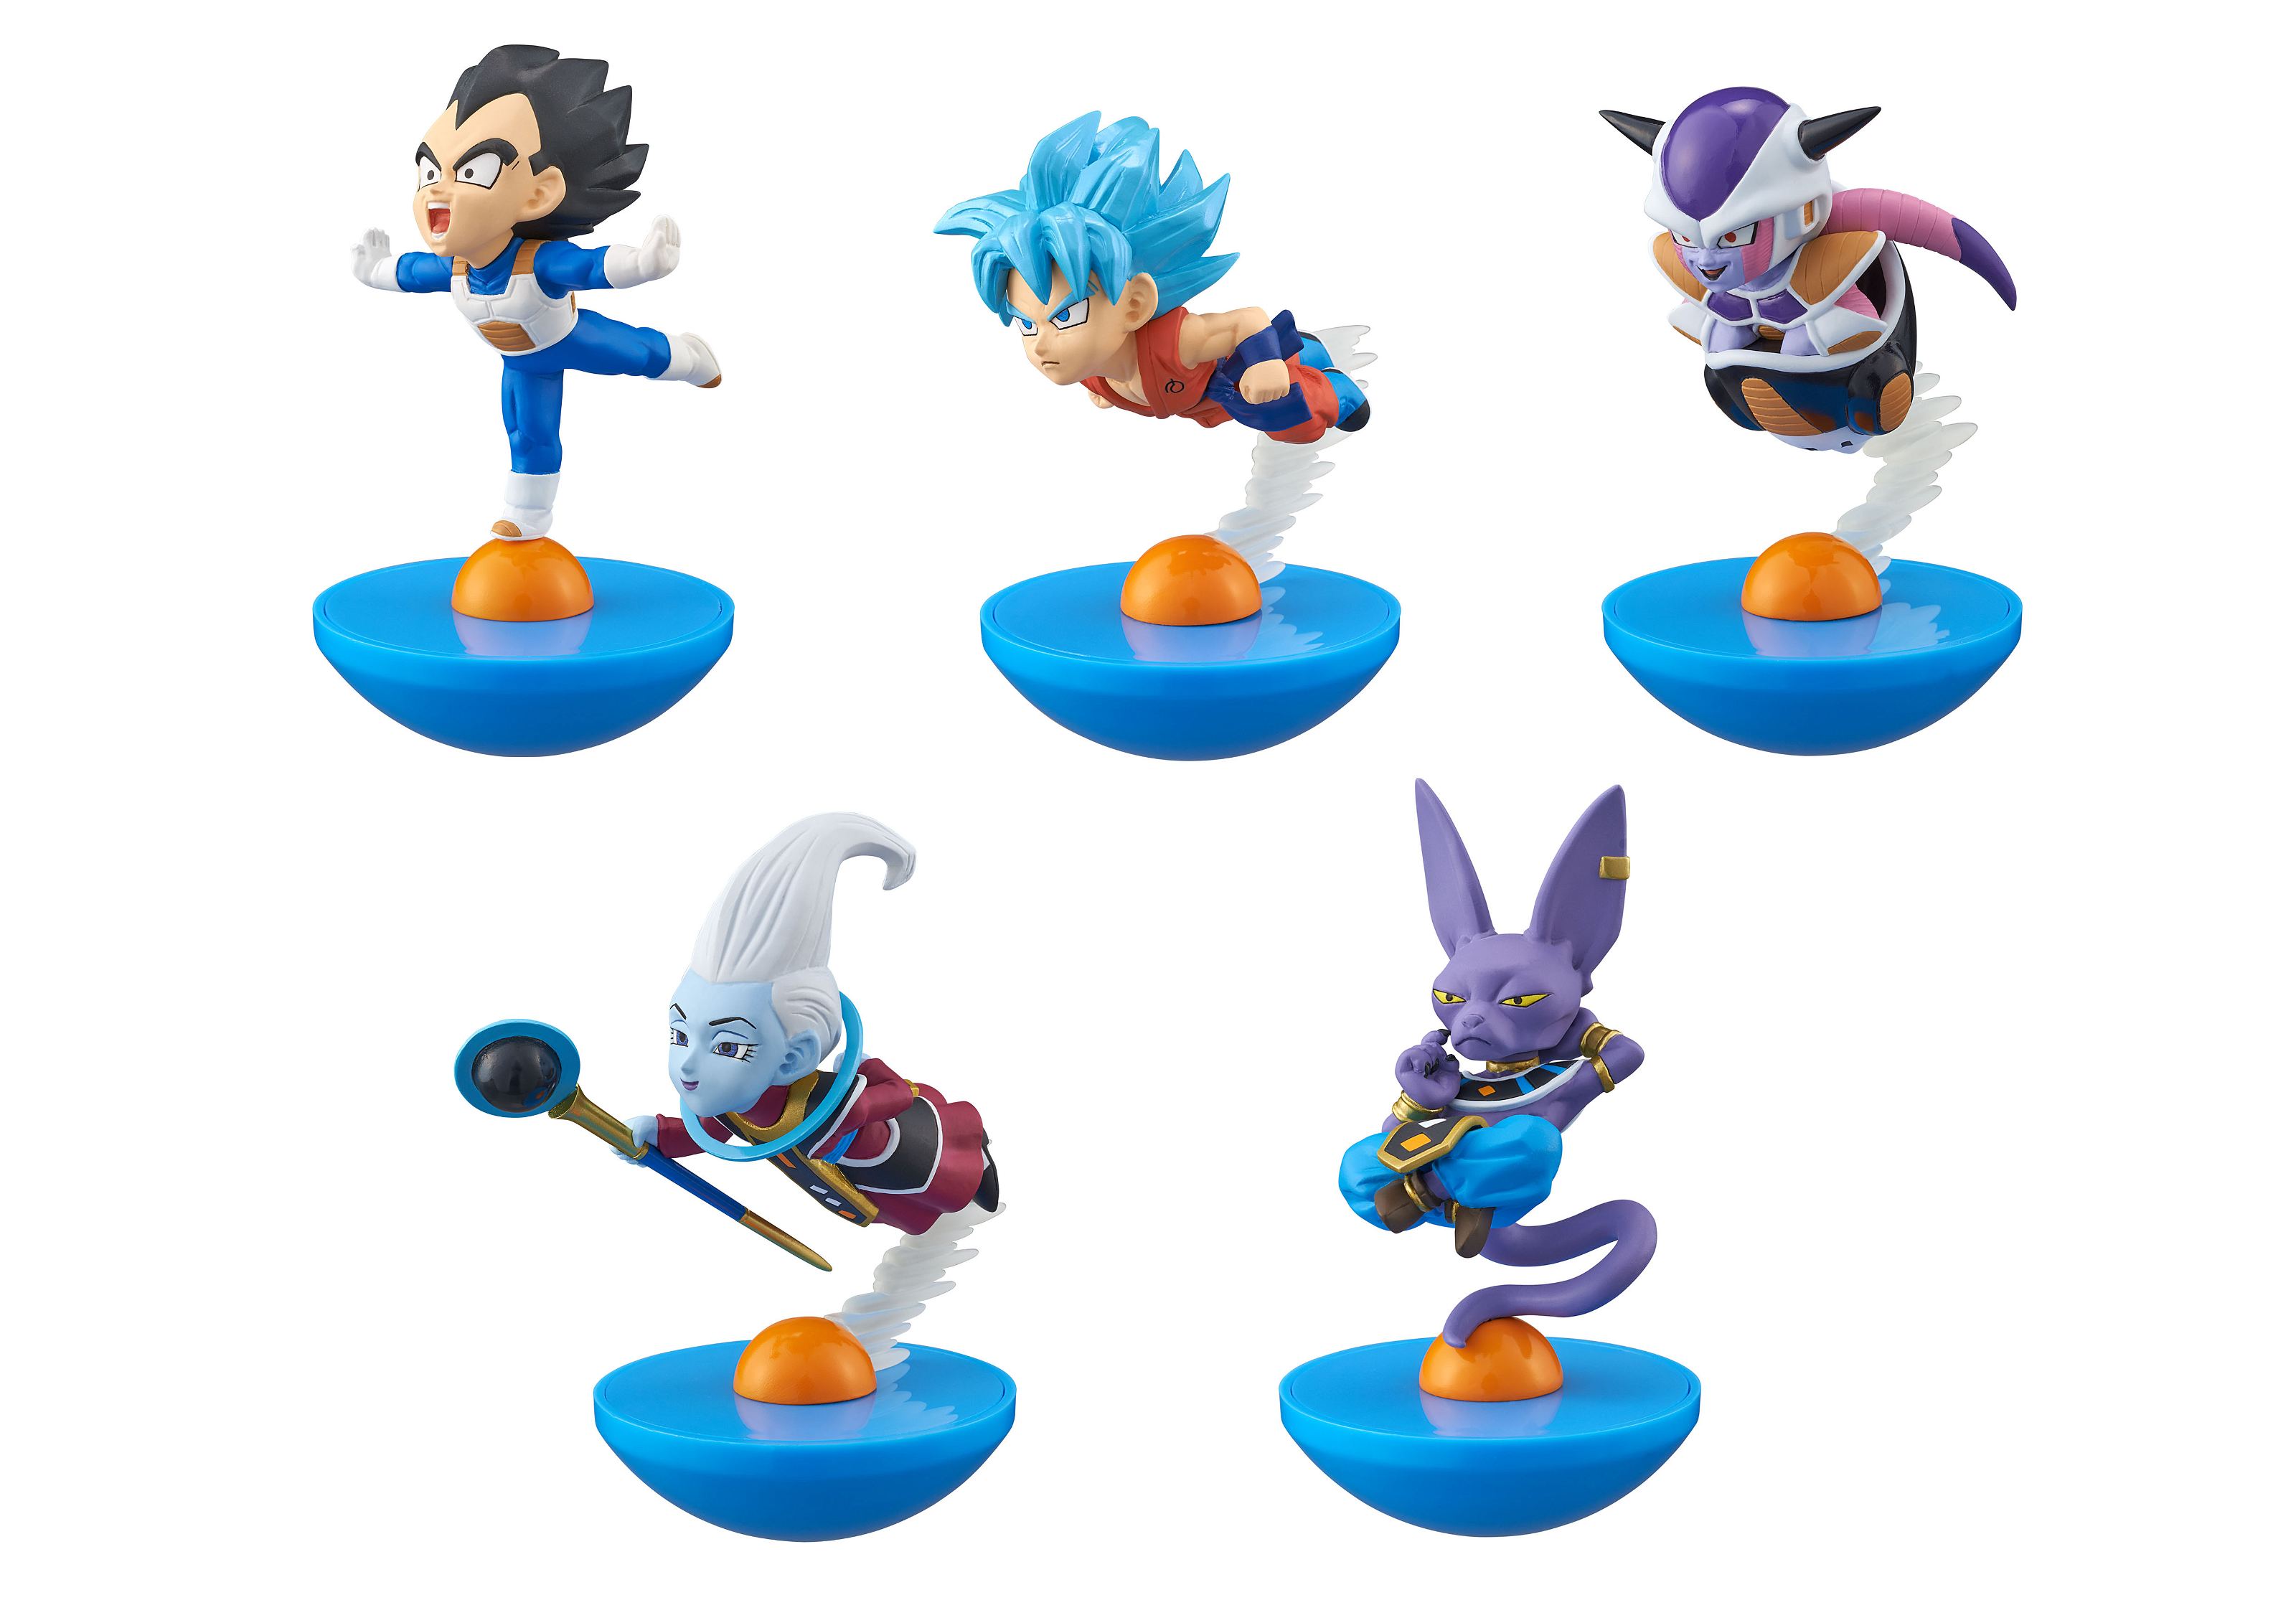 https://www.play-asia.com/yuracolle-dragon-ball-super-set-of-5-pieces/13/709k2f